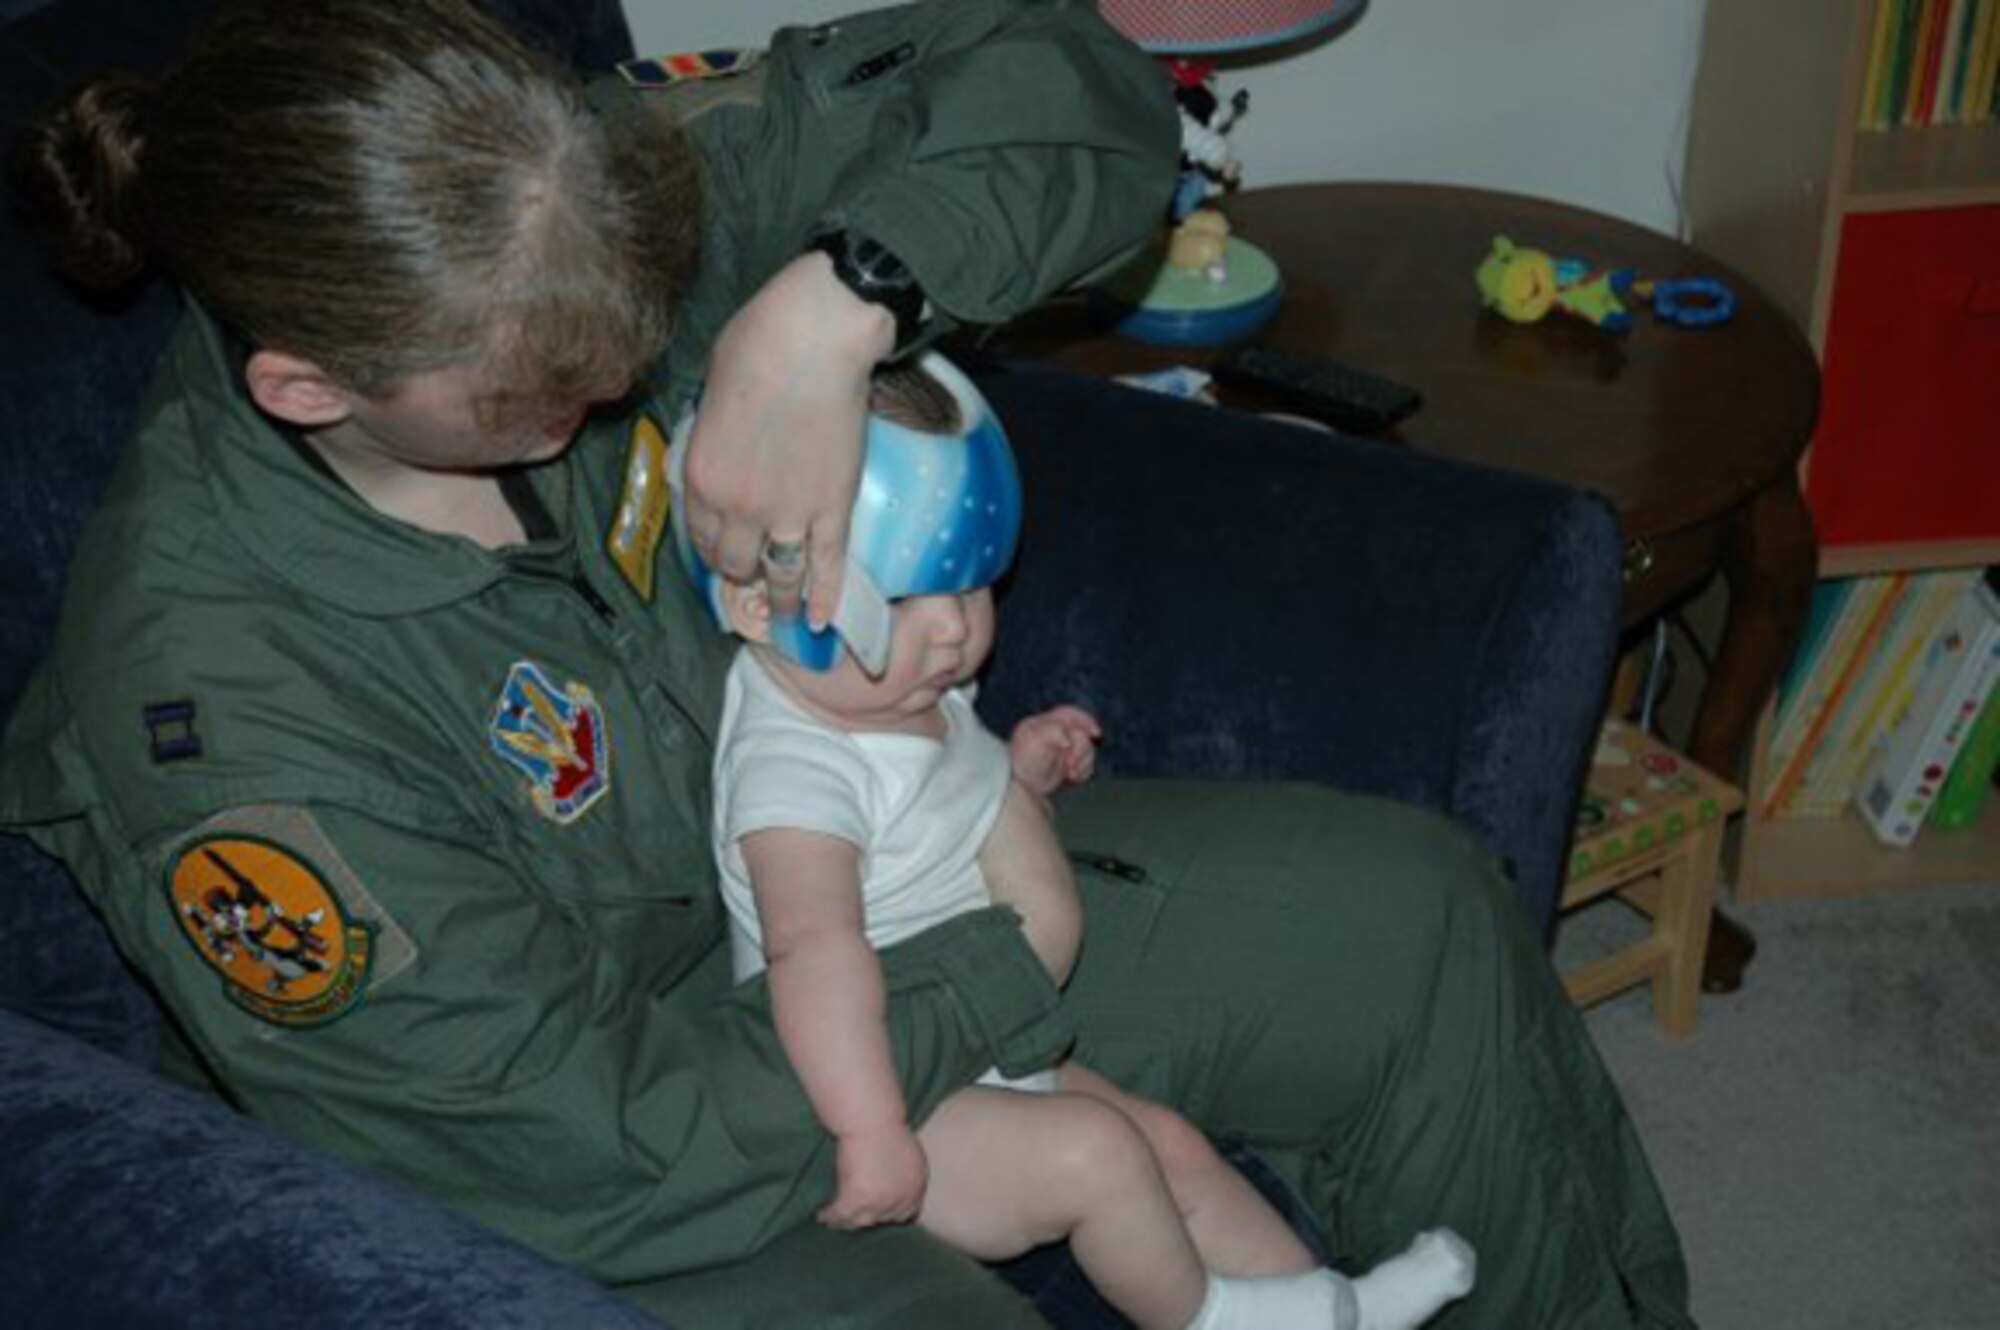 OFFUTT AIR FORCE BASE, Neb. -- Capt. Sonja Hosler, the mobility flight chief for the 45th Reconnaissance Squadron, holds her six-month-old son, Clark Alexander, while she carefully removes his cranial helmet. Clark required the helmet to correct a severe flat spot on his head, officially known as plagiocephaly Captain Hosler and her husband Adam were able to purchase the helmet after receiving a $2,500 grant from the Air Force Aid Society. U.S. Air Force Courtesy Photo